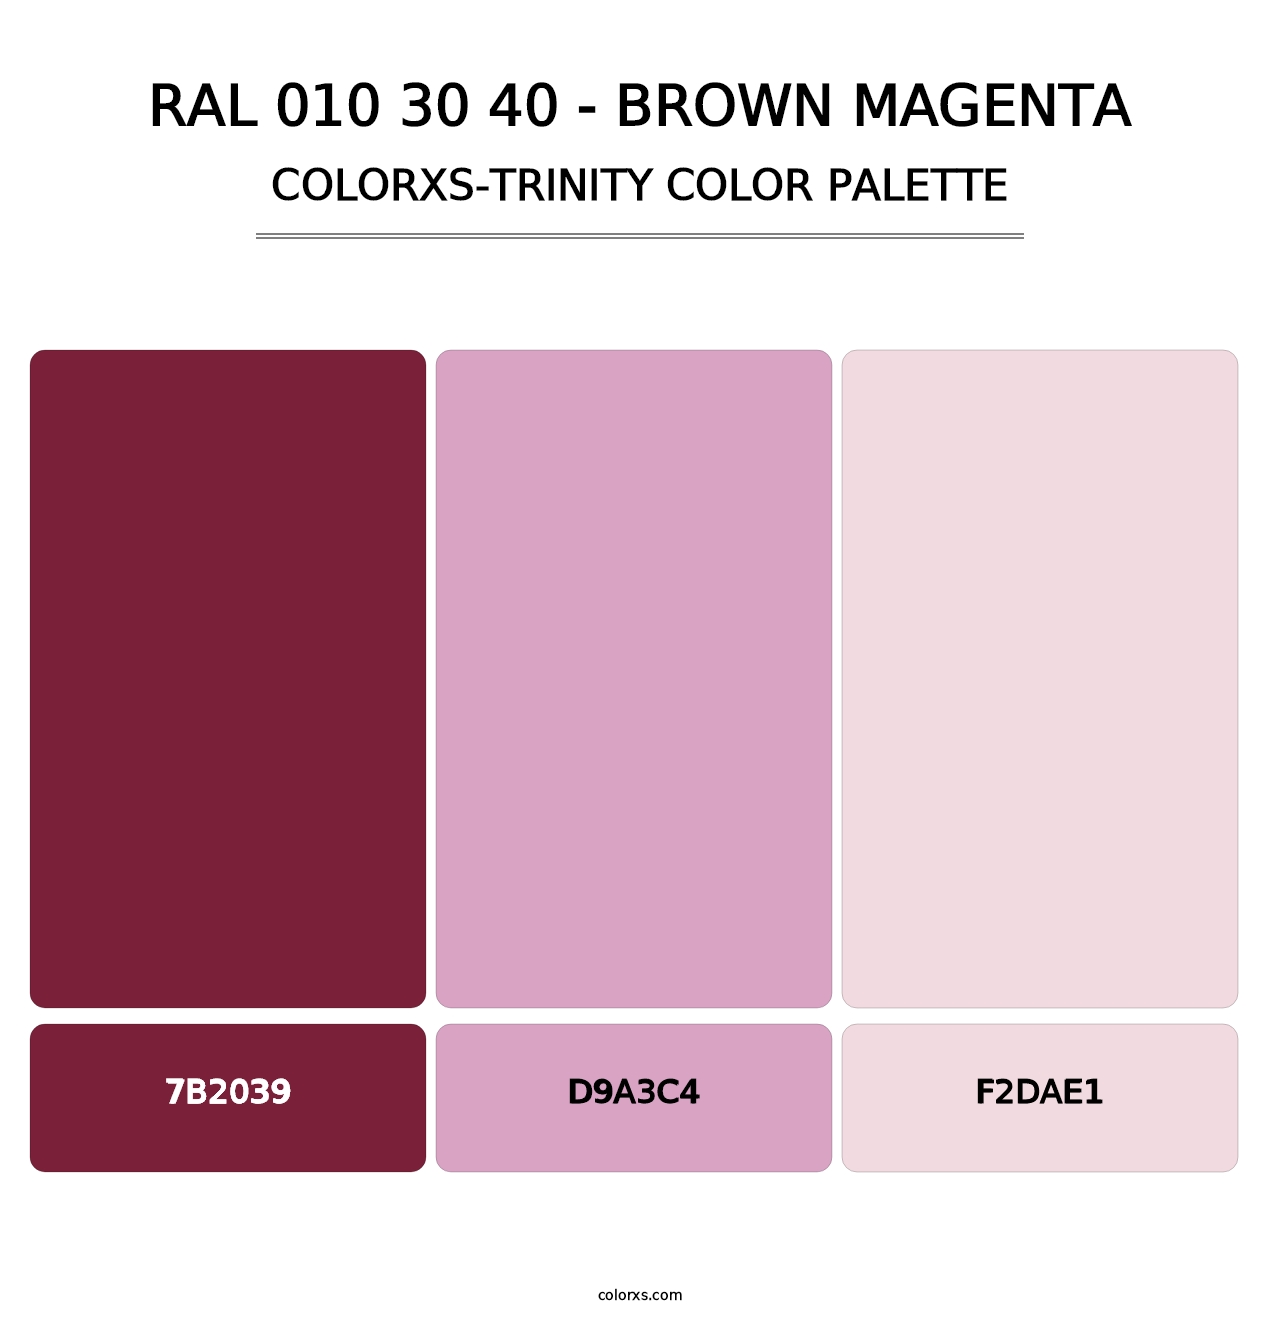 RAL 010 30 40 - Brown Magenta - Colorxs Trinity Palette